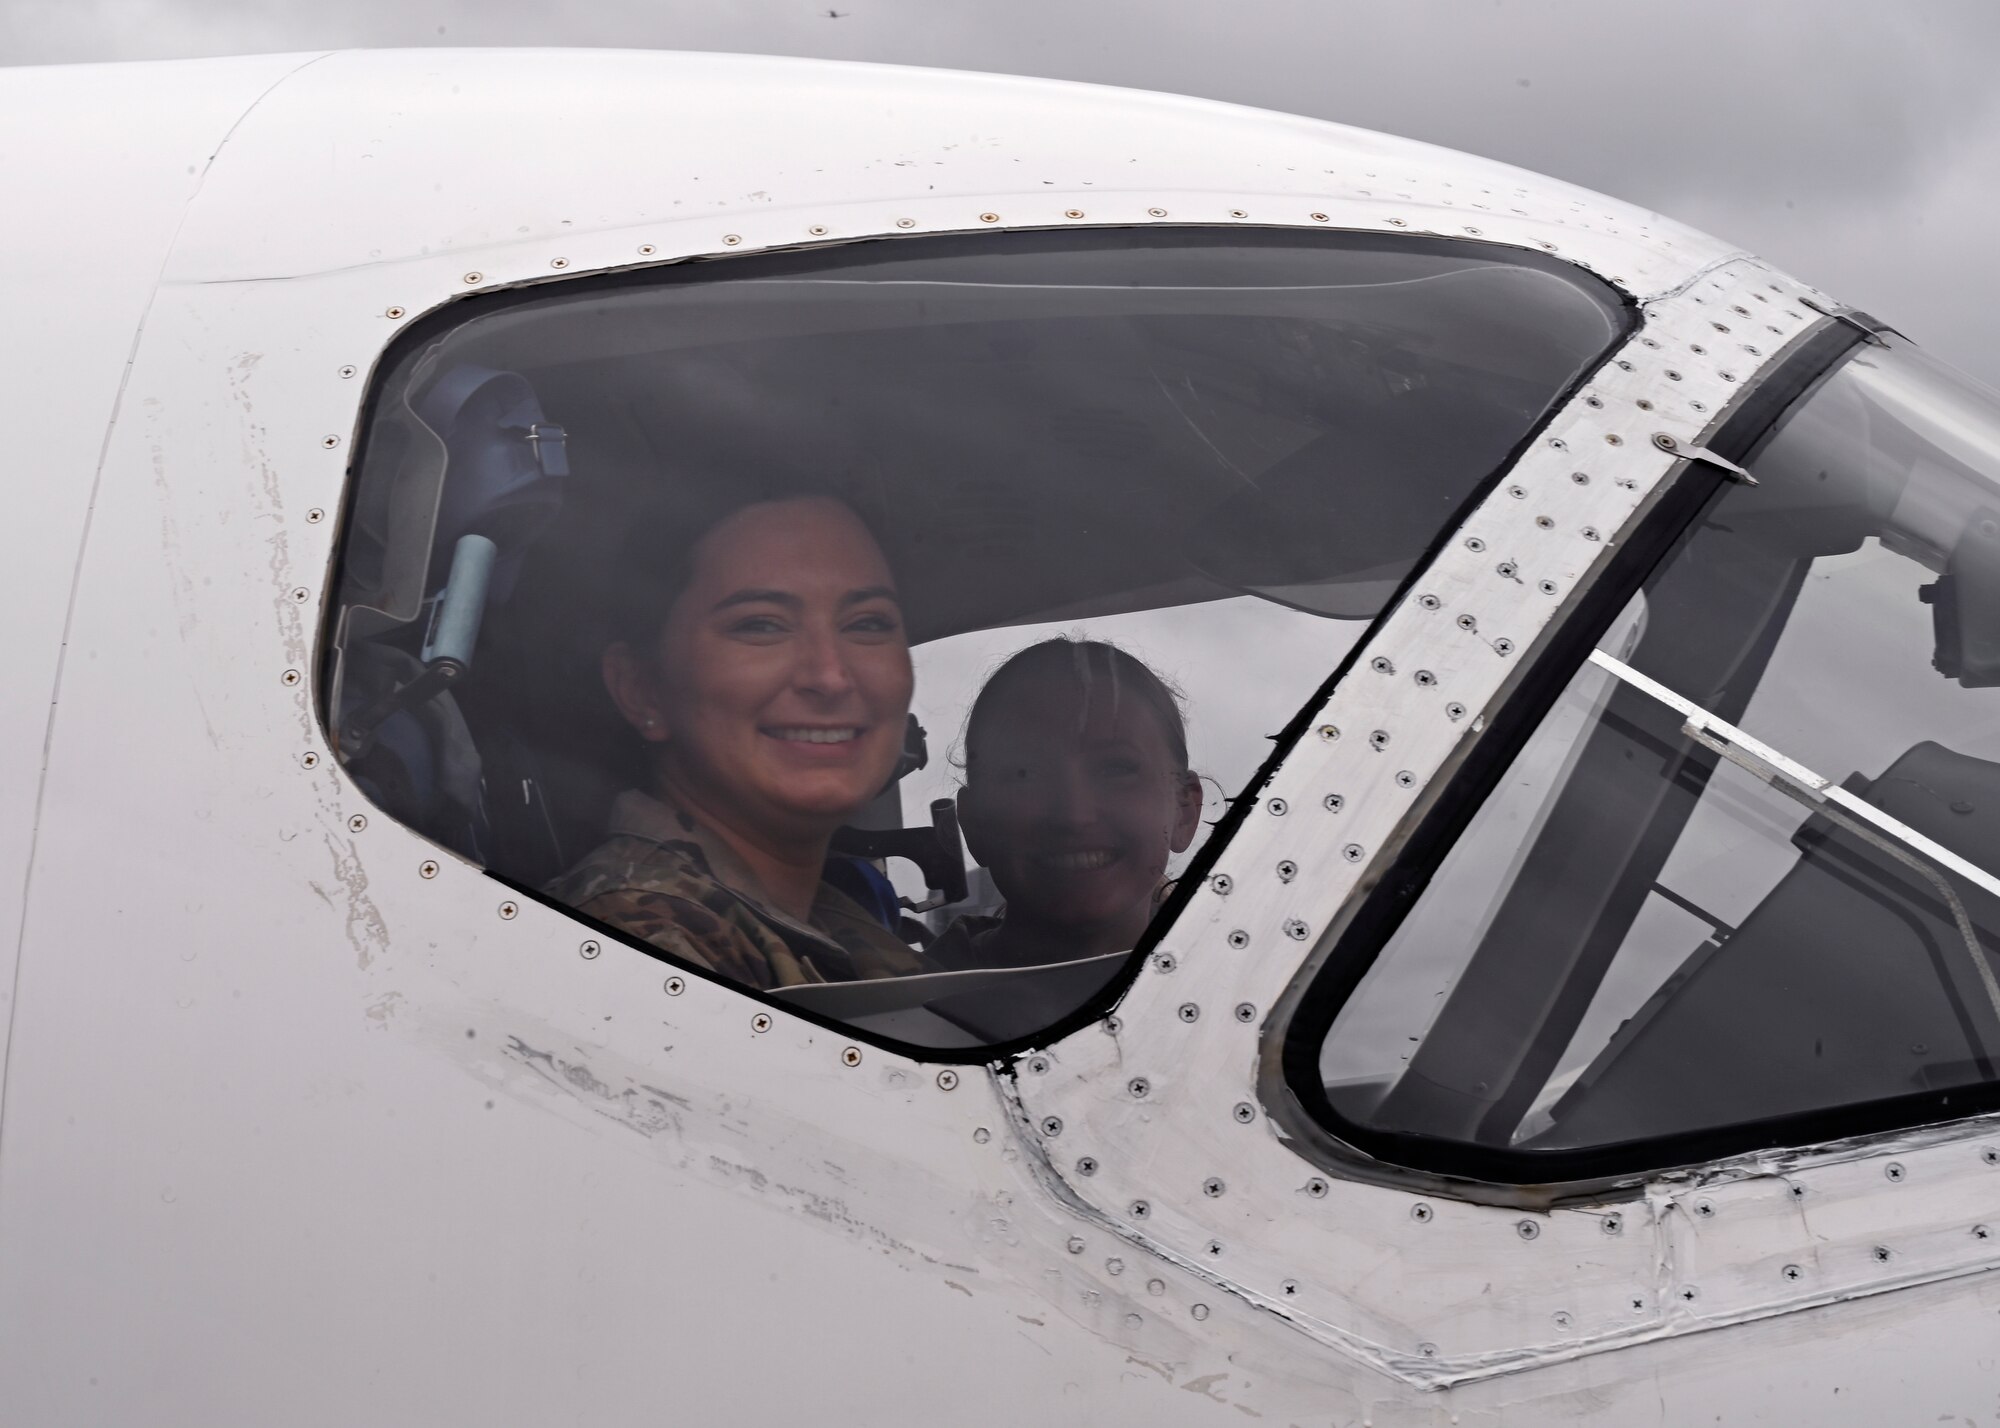 U.S. Air Force Tech. Sgt. Casaadi Bubois, left, 627th Force support Squadron NCO in charge of career development and Airman 1st Class Erika Weatherly, 62d Comptroller Squadron budget analyst, sit in the cockpit of a T-1 aircraft at Columbus Air Force Base, Miss., Feb. 15, 2023. Team McChord Airmen toured Columbus AFB and gained first-hand experience of their mission: Produce Pilots, Advance Airmen, Feed the Fight. (U.S. Air Force photo by Senior Airman Callie Norton)